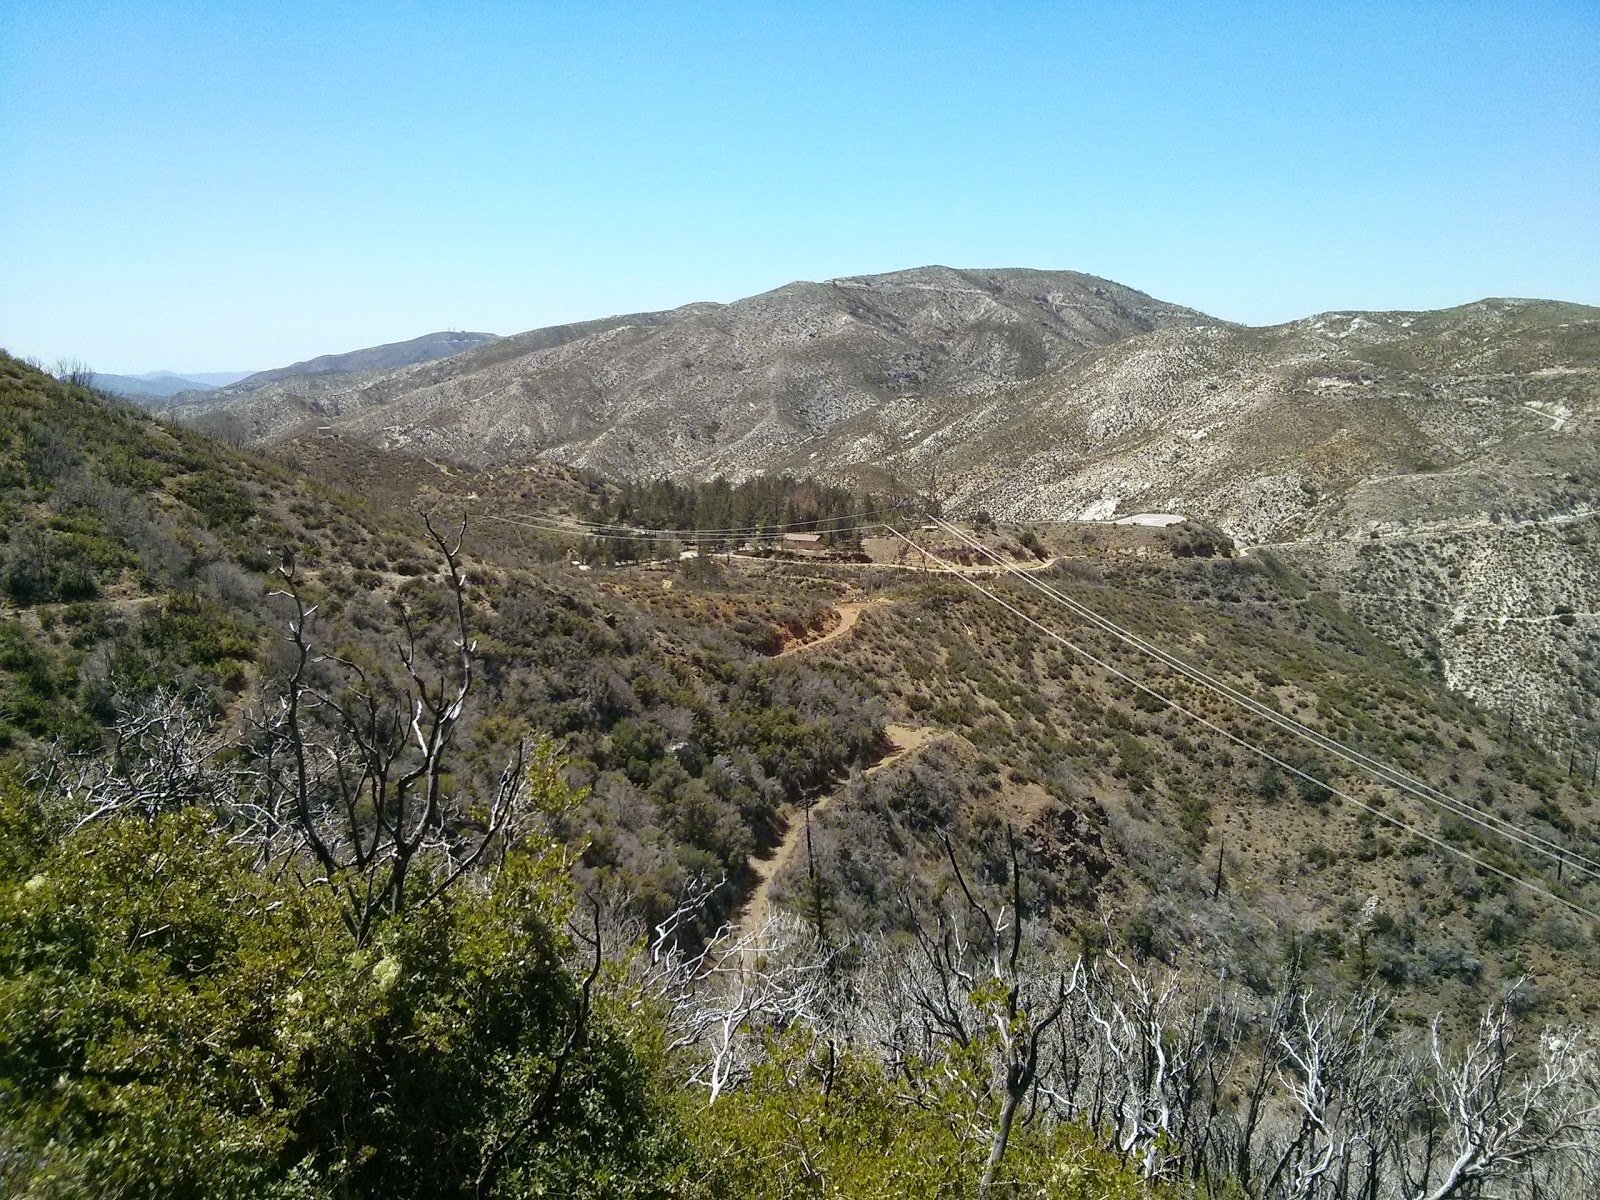 View on the North Fork Ranger Station